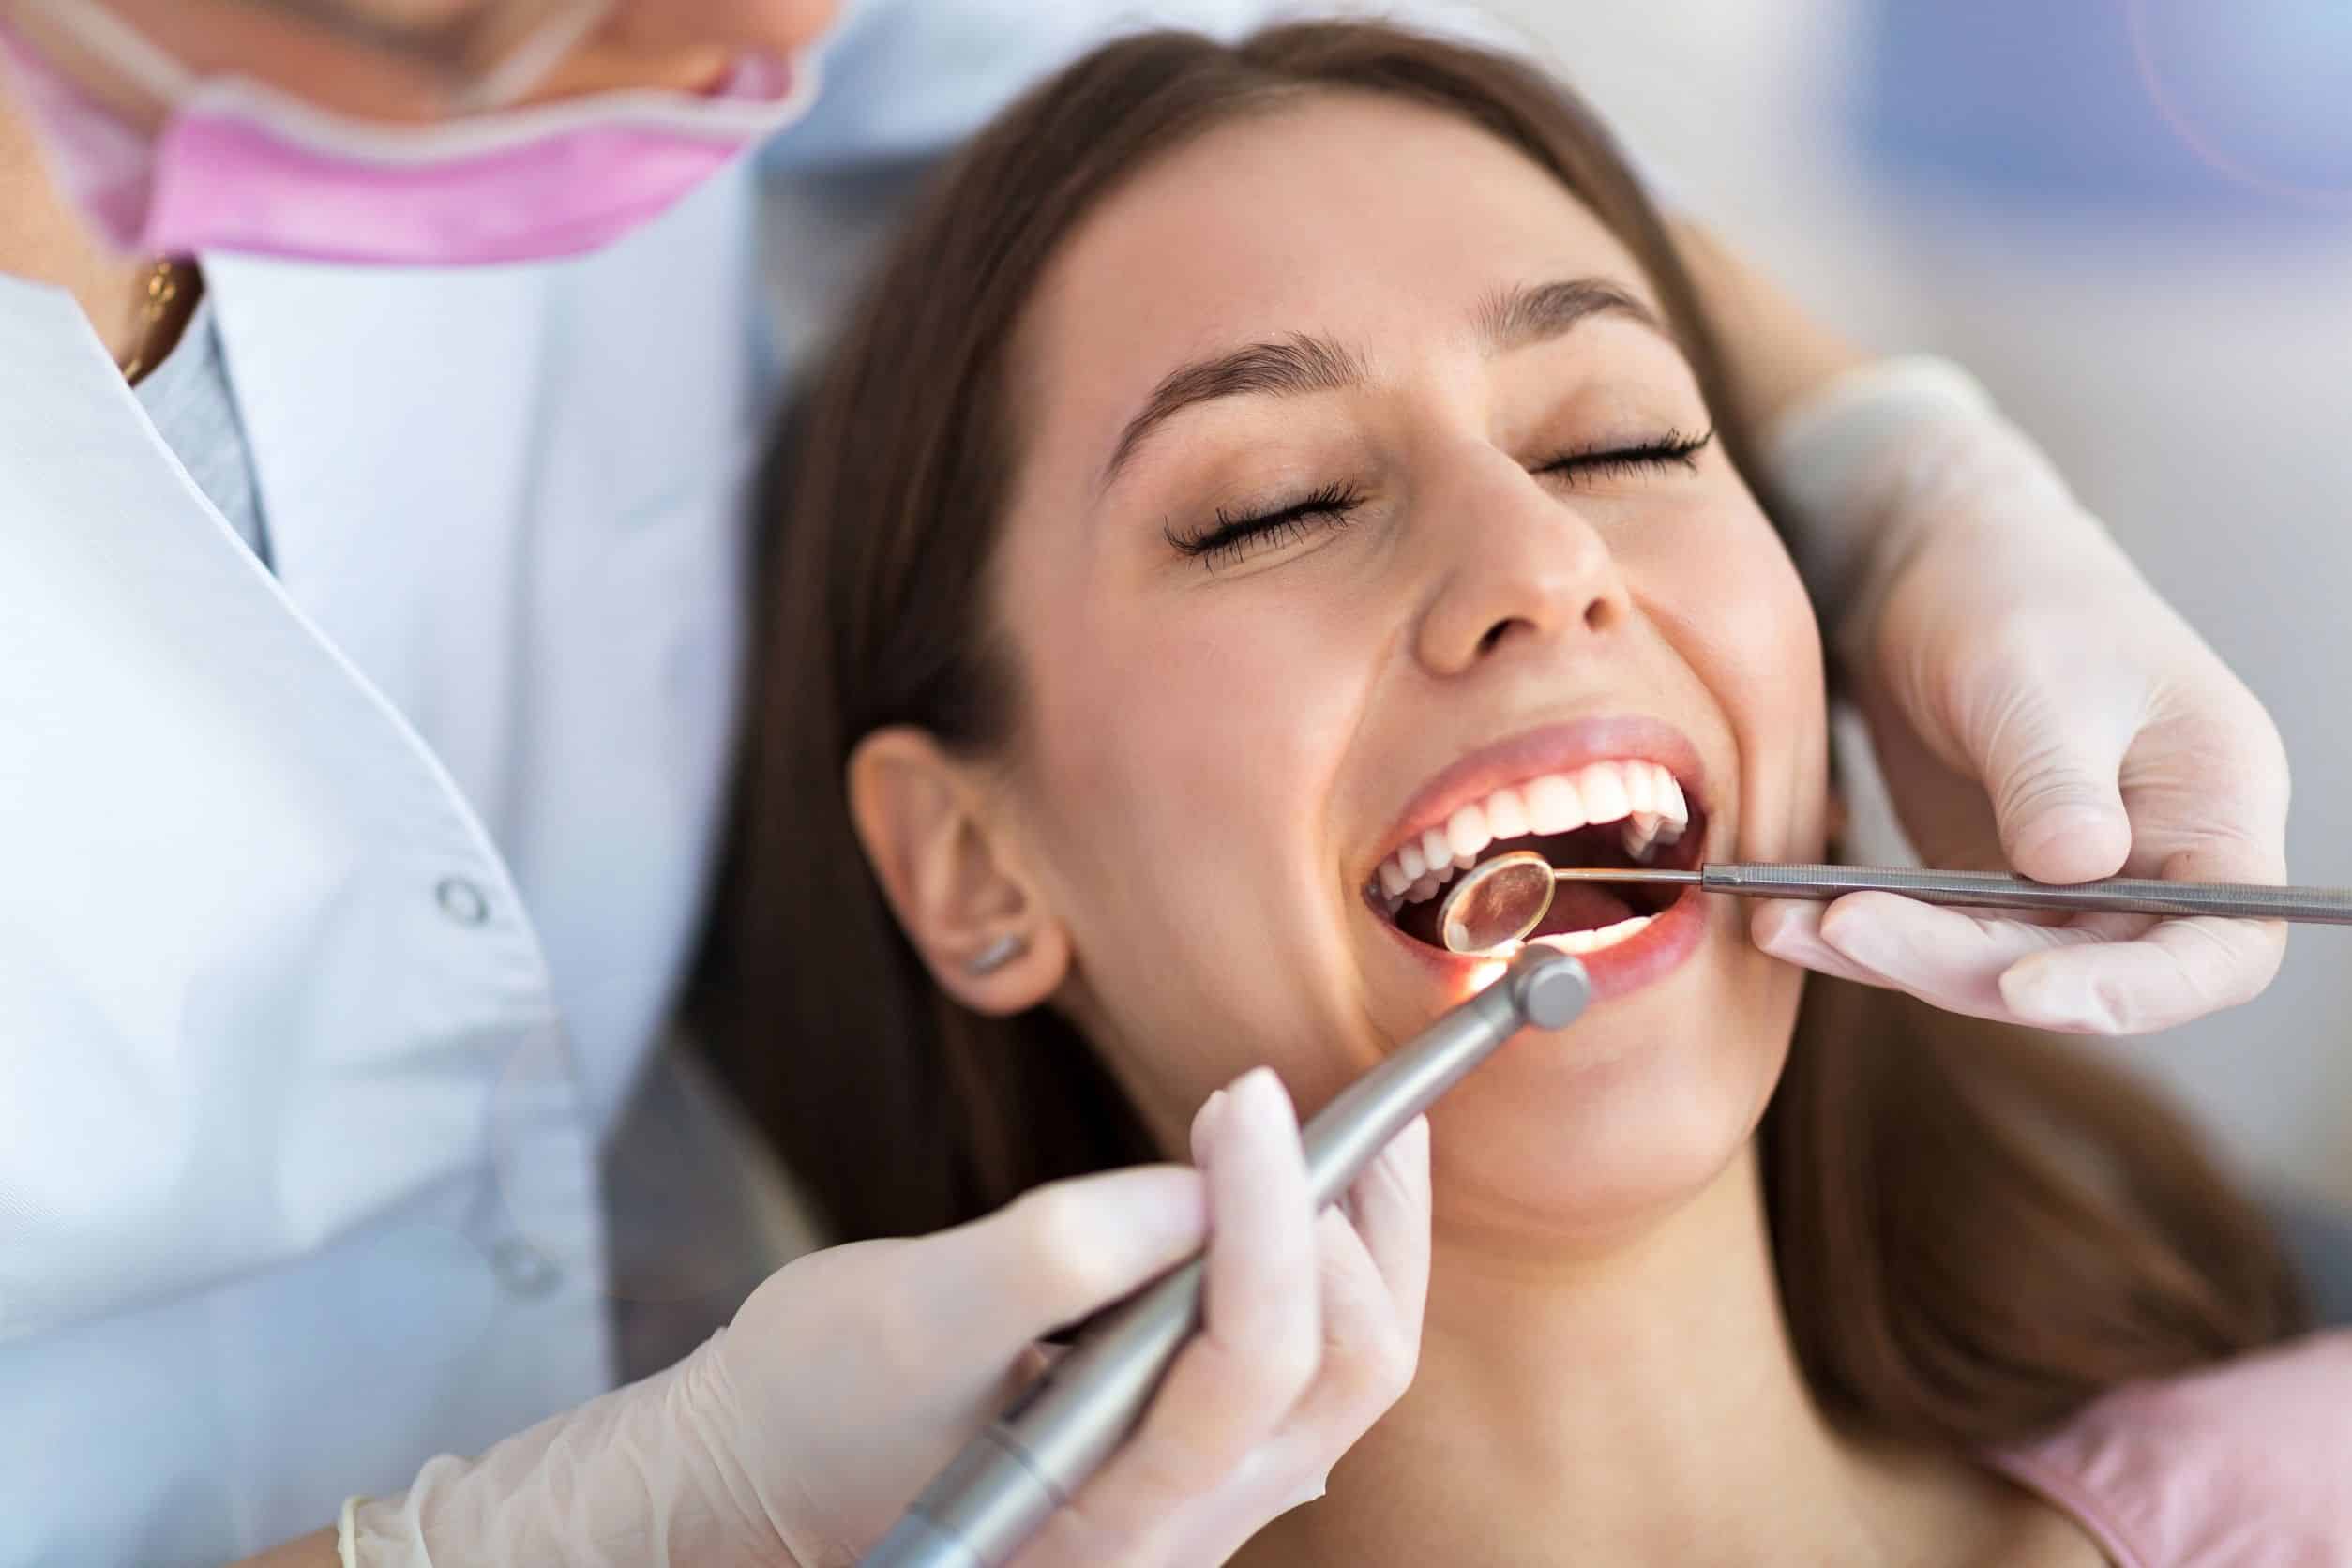 woman at the dentist; holistic dentistry concept